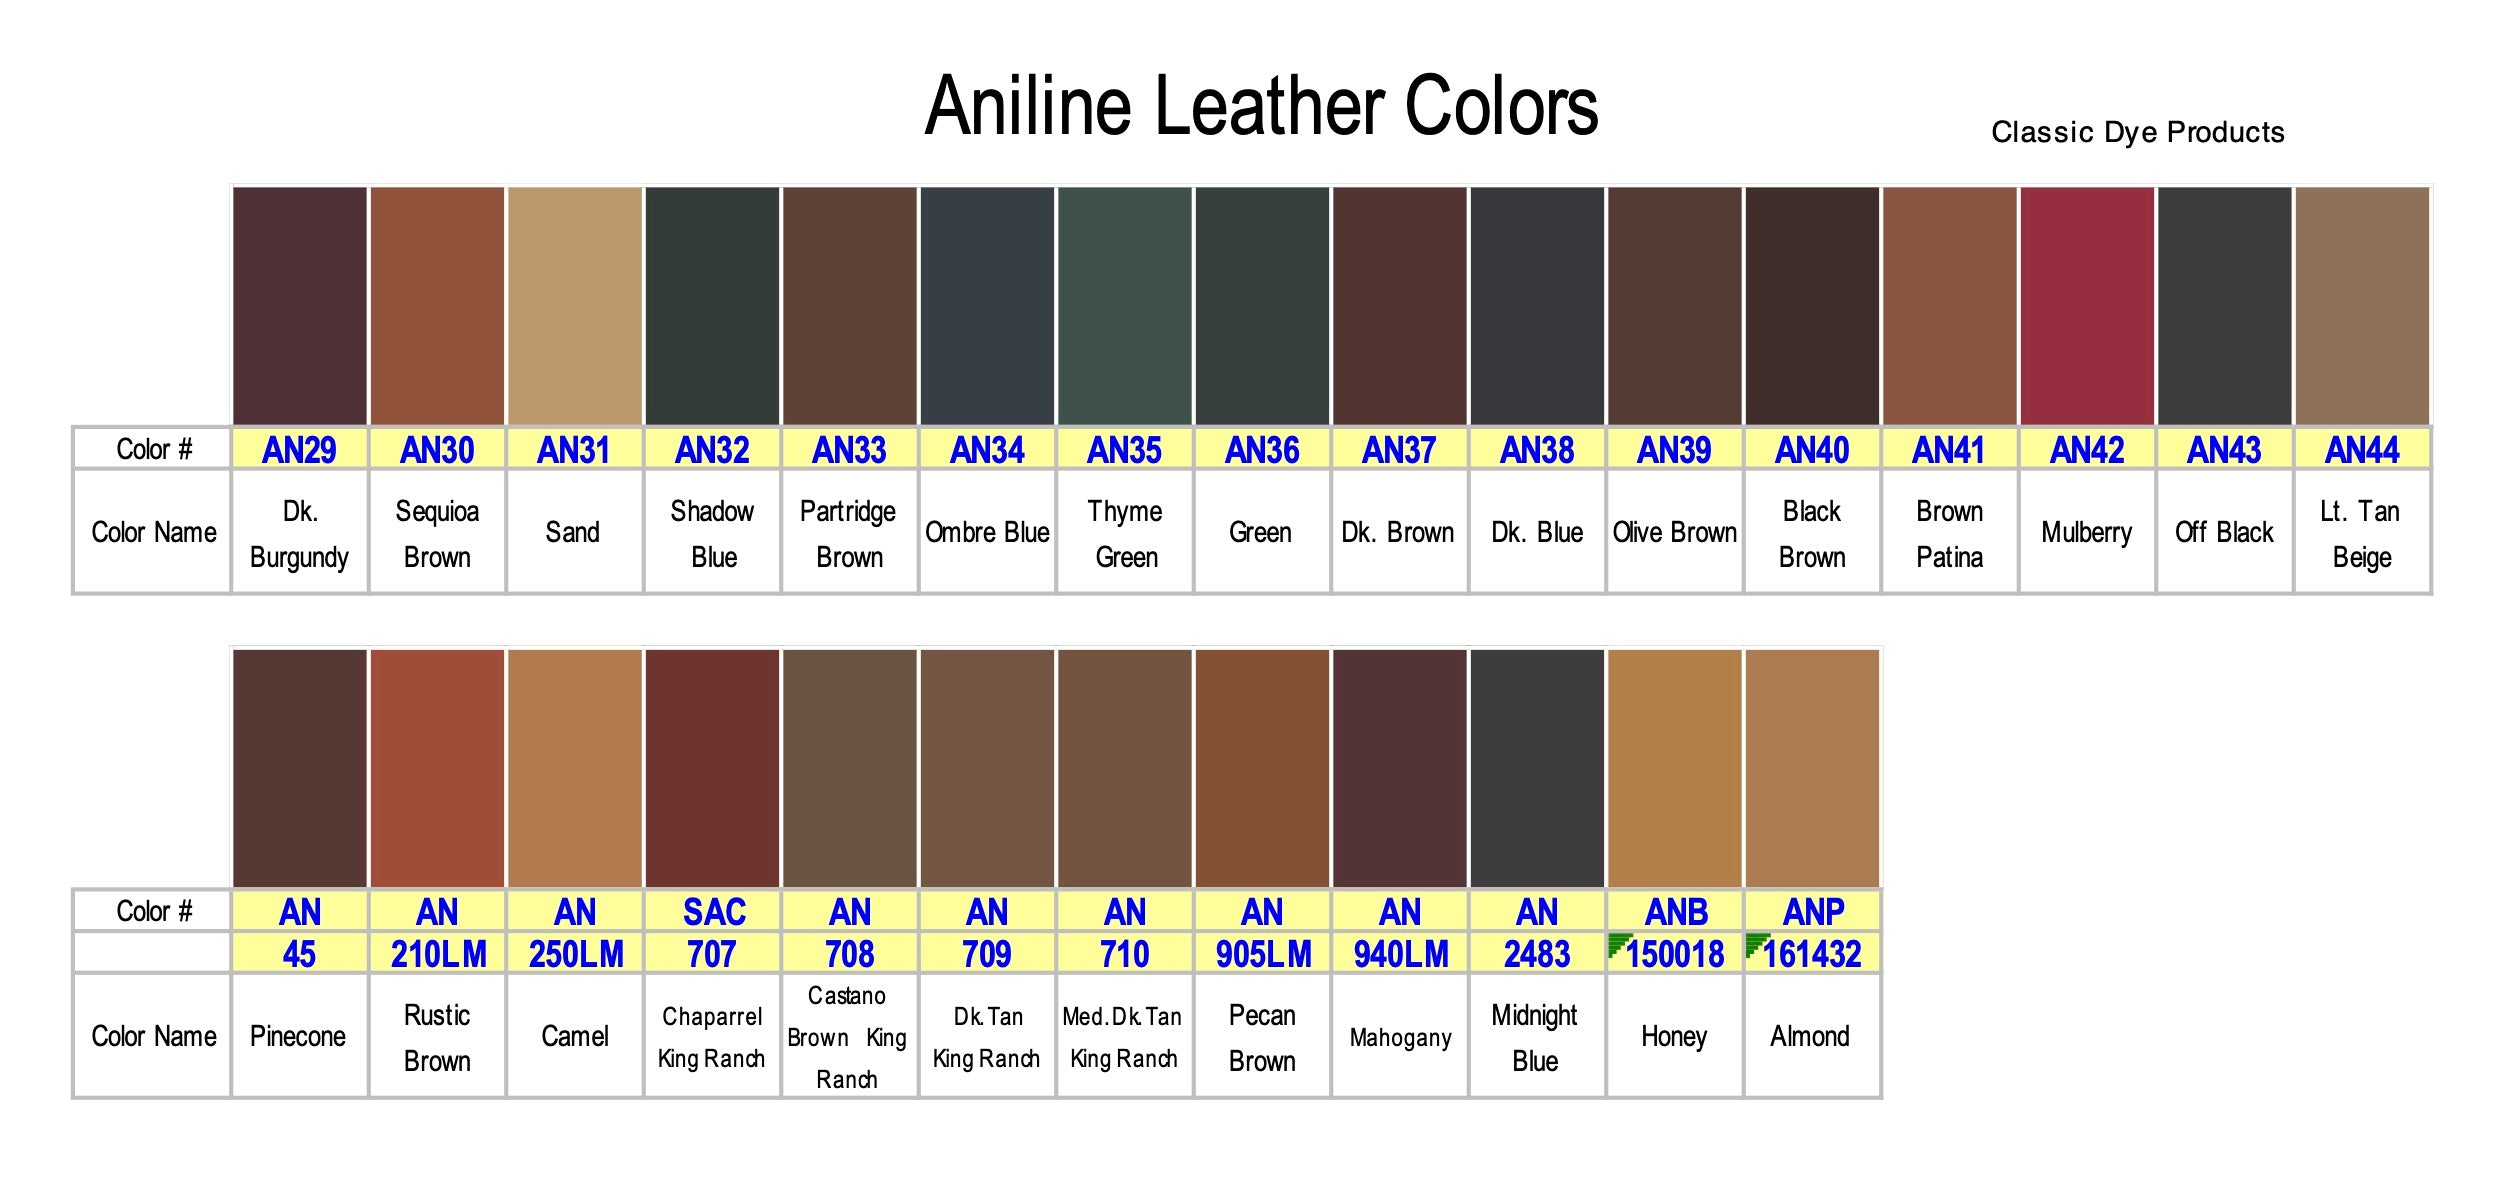 Historical leather colors 